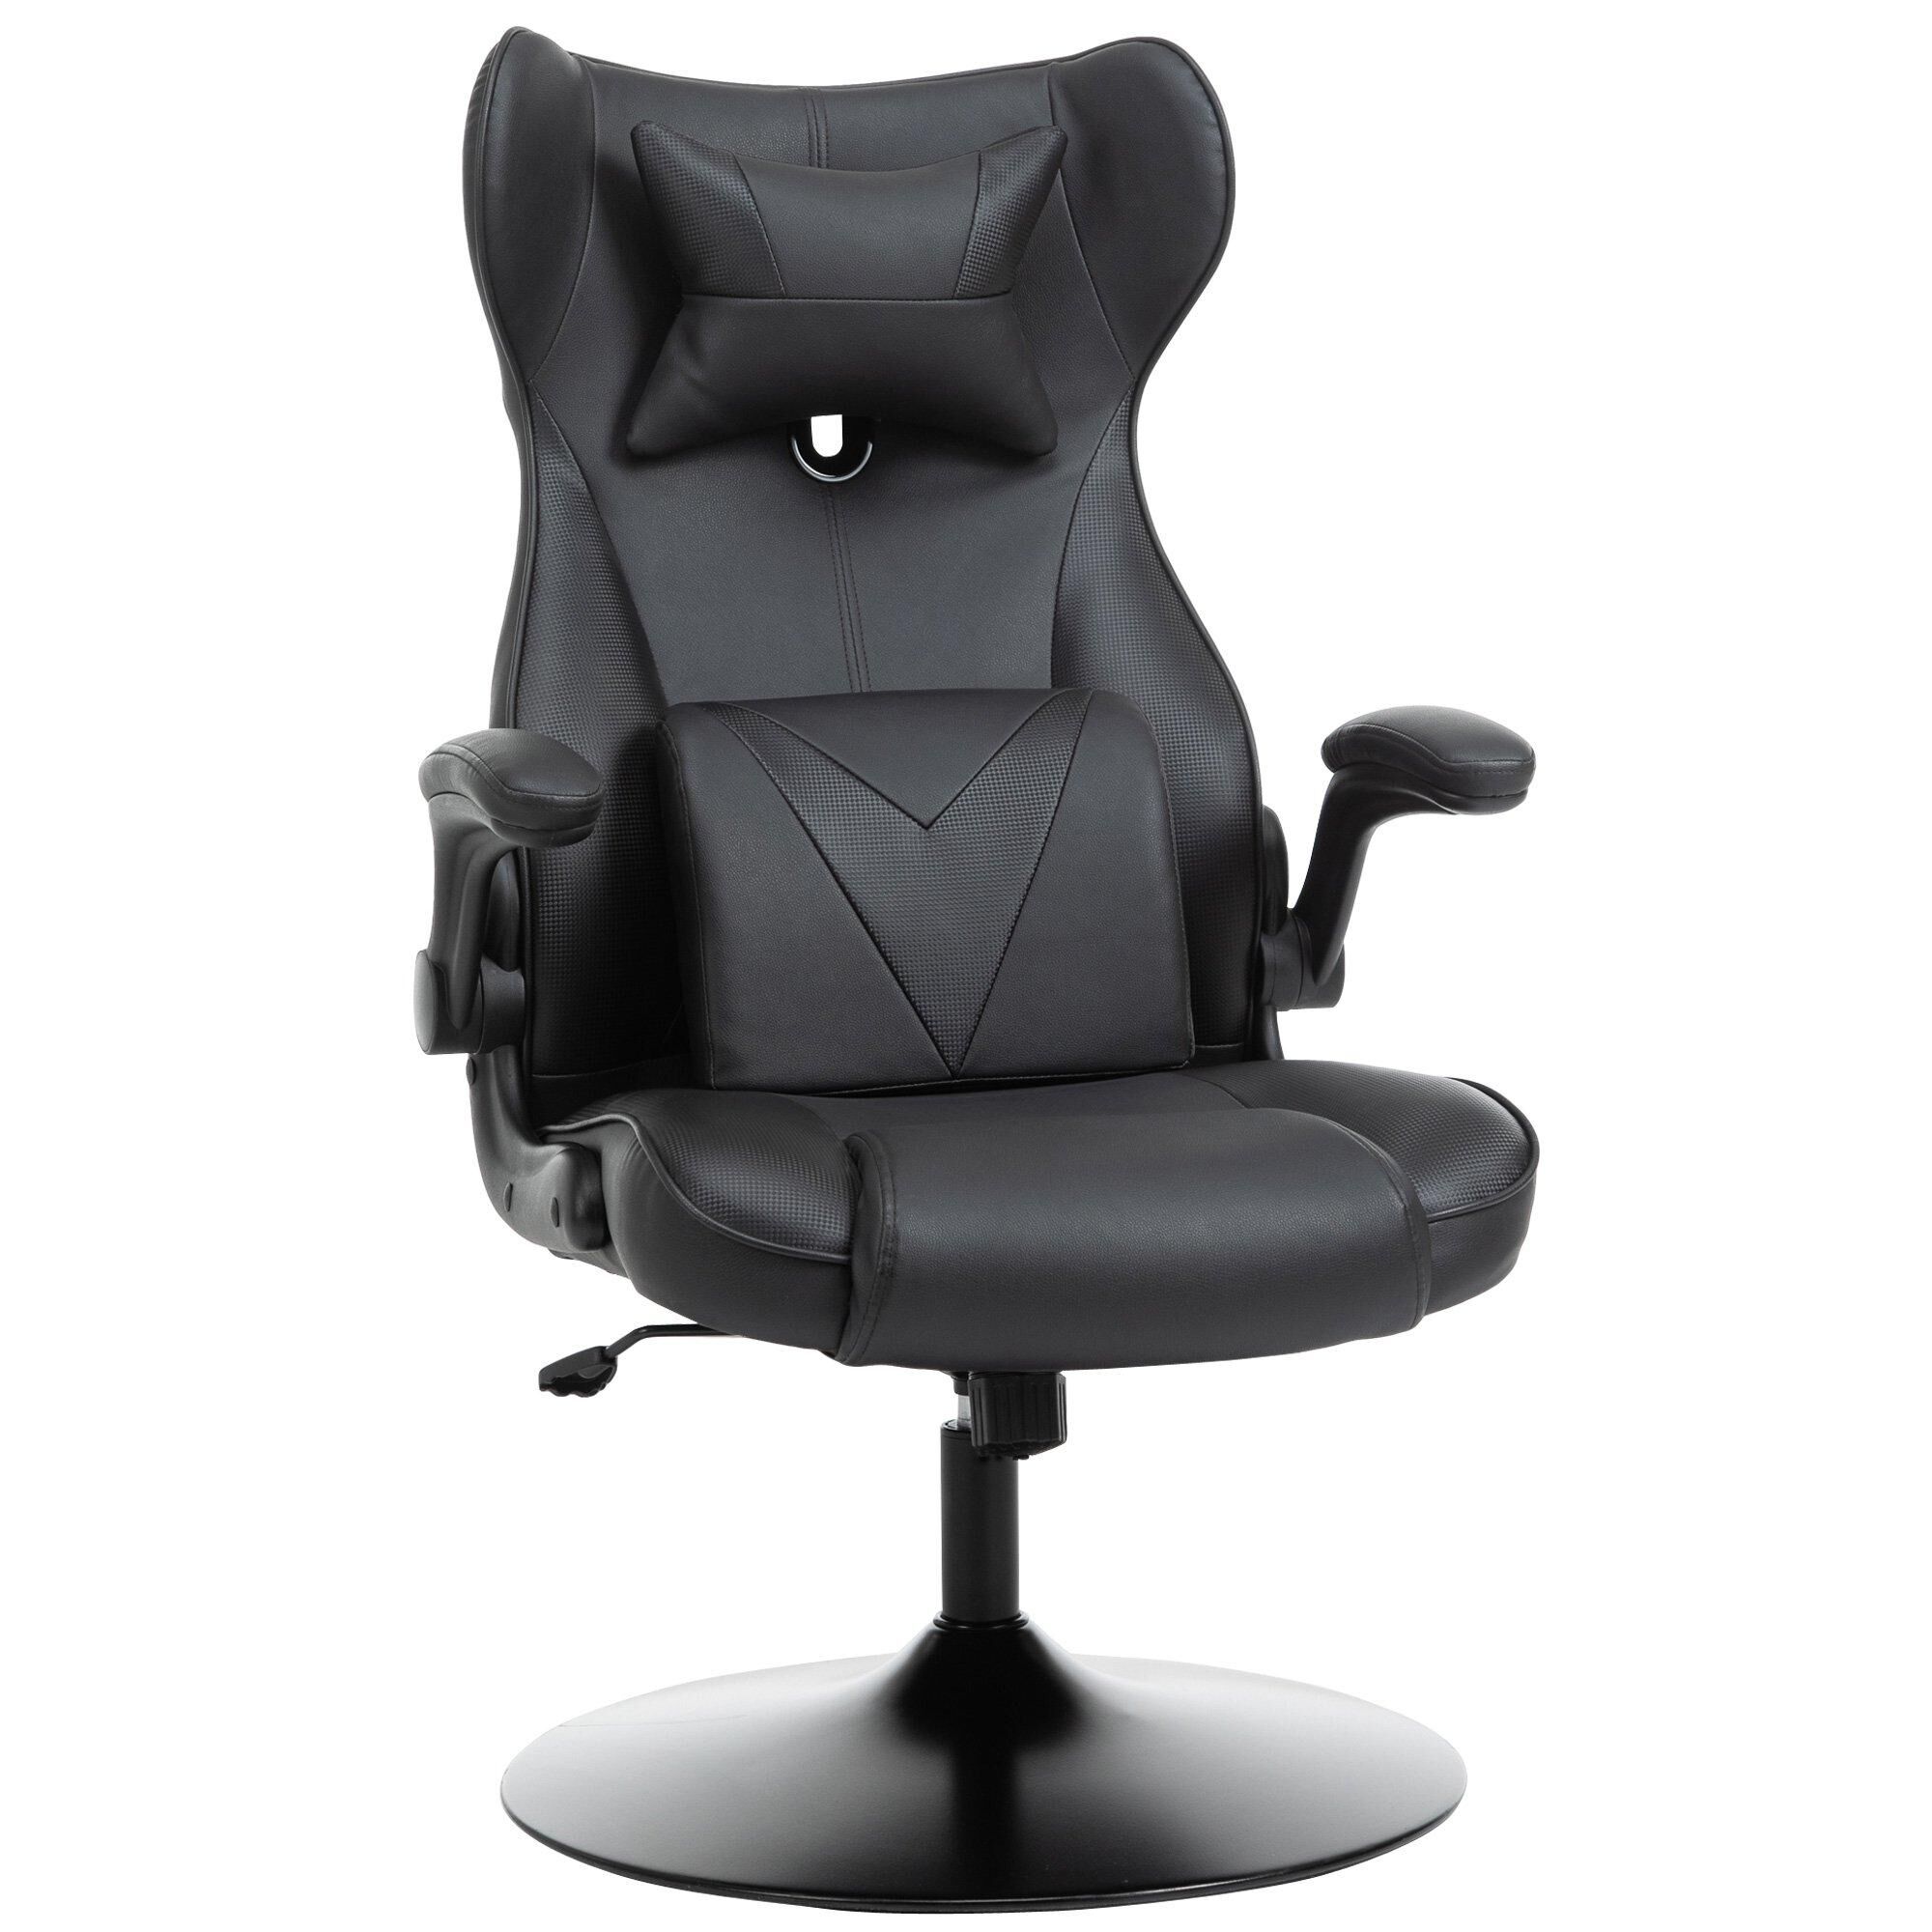 VINSETTO Video Game Chair Computer Chair with Flip up Armrests Headrest